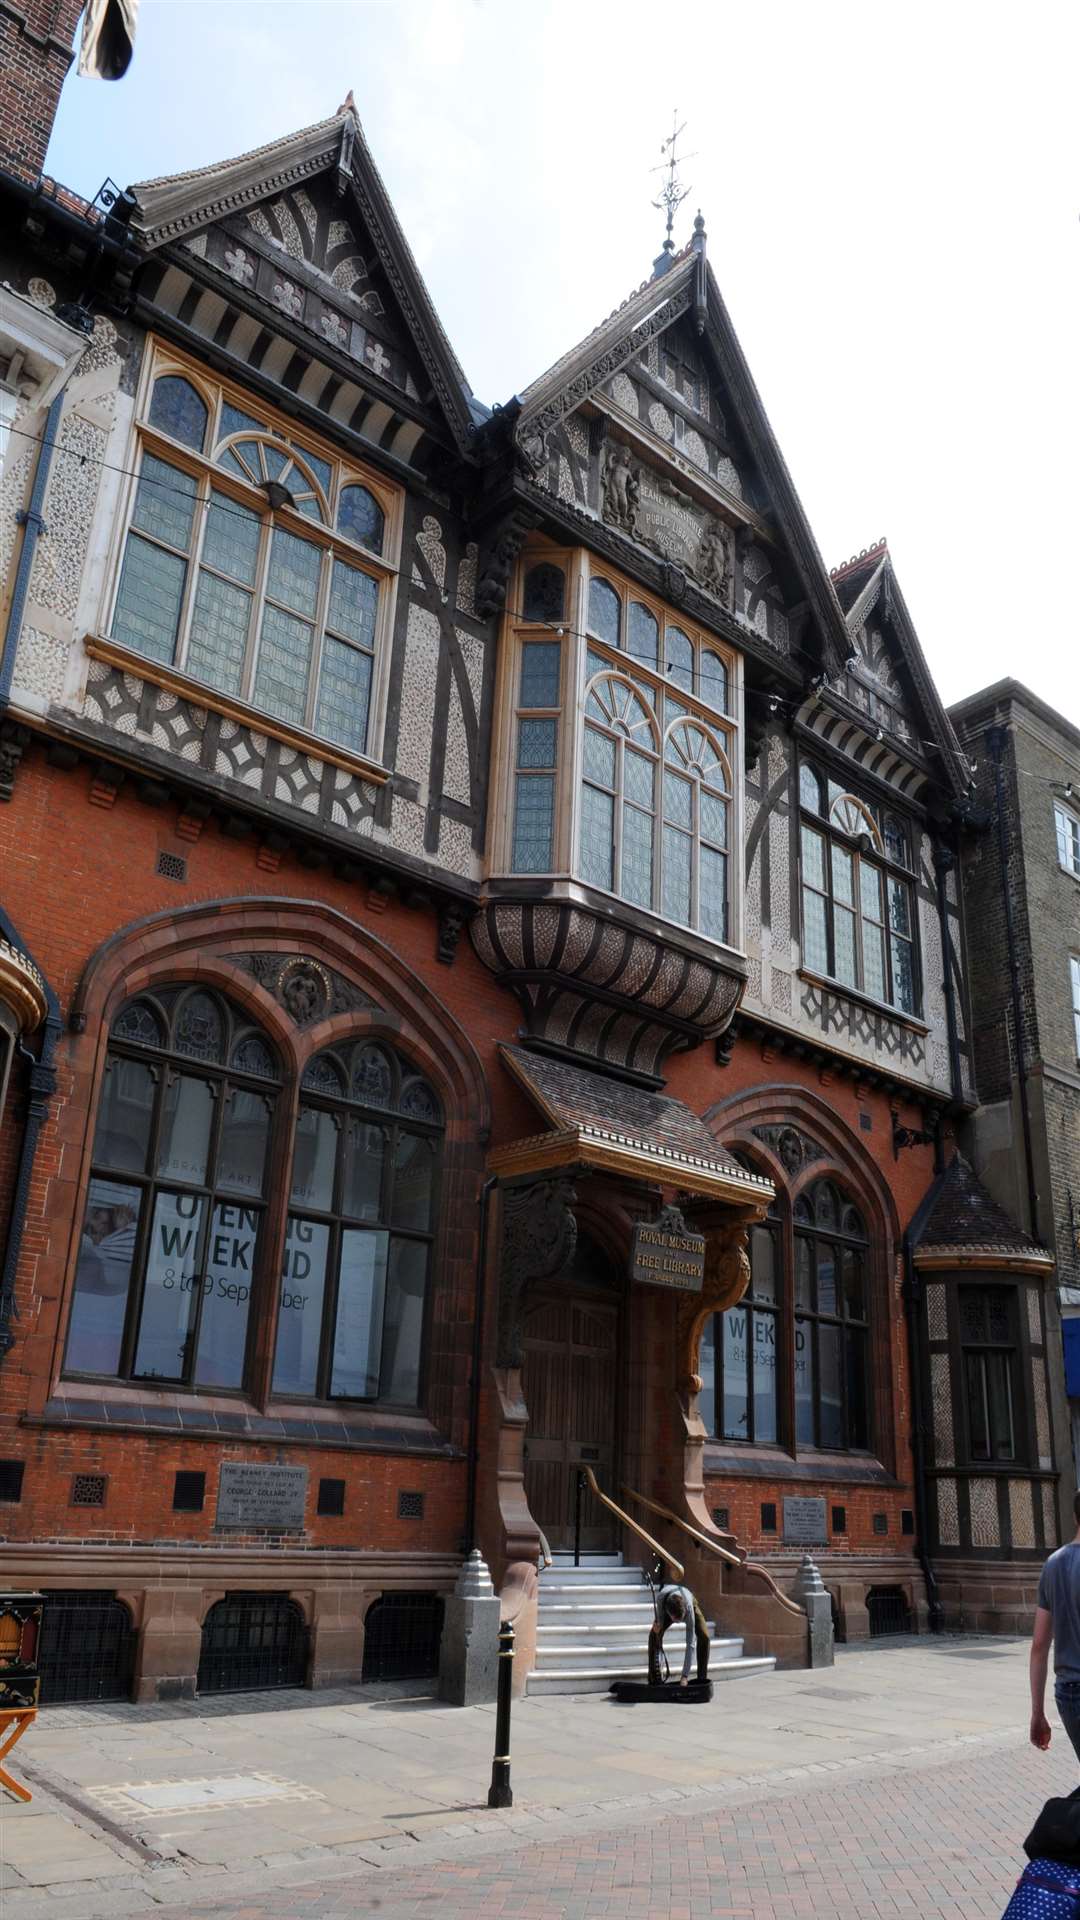 The Beaney museum in High Street, Canterbury